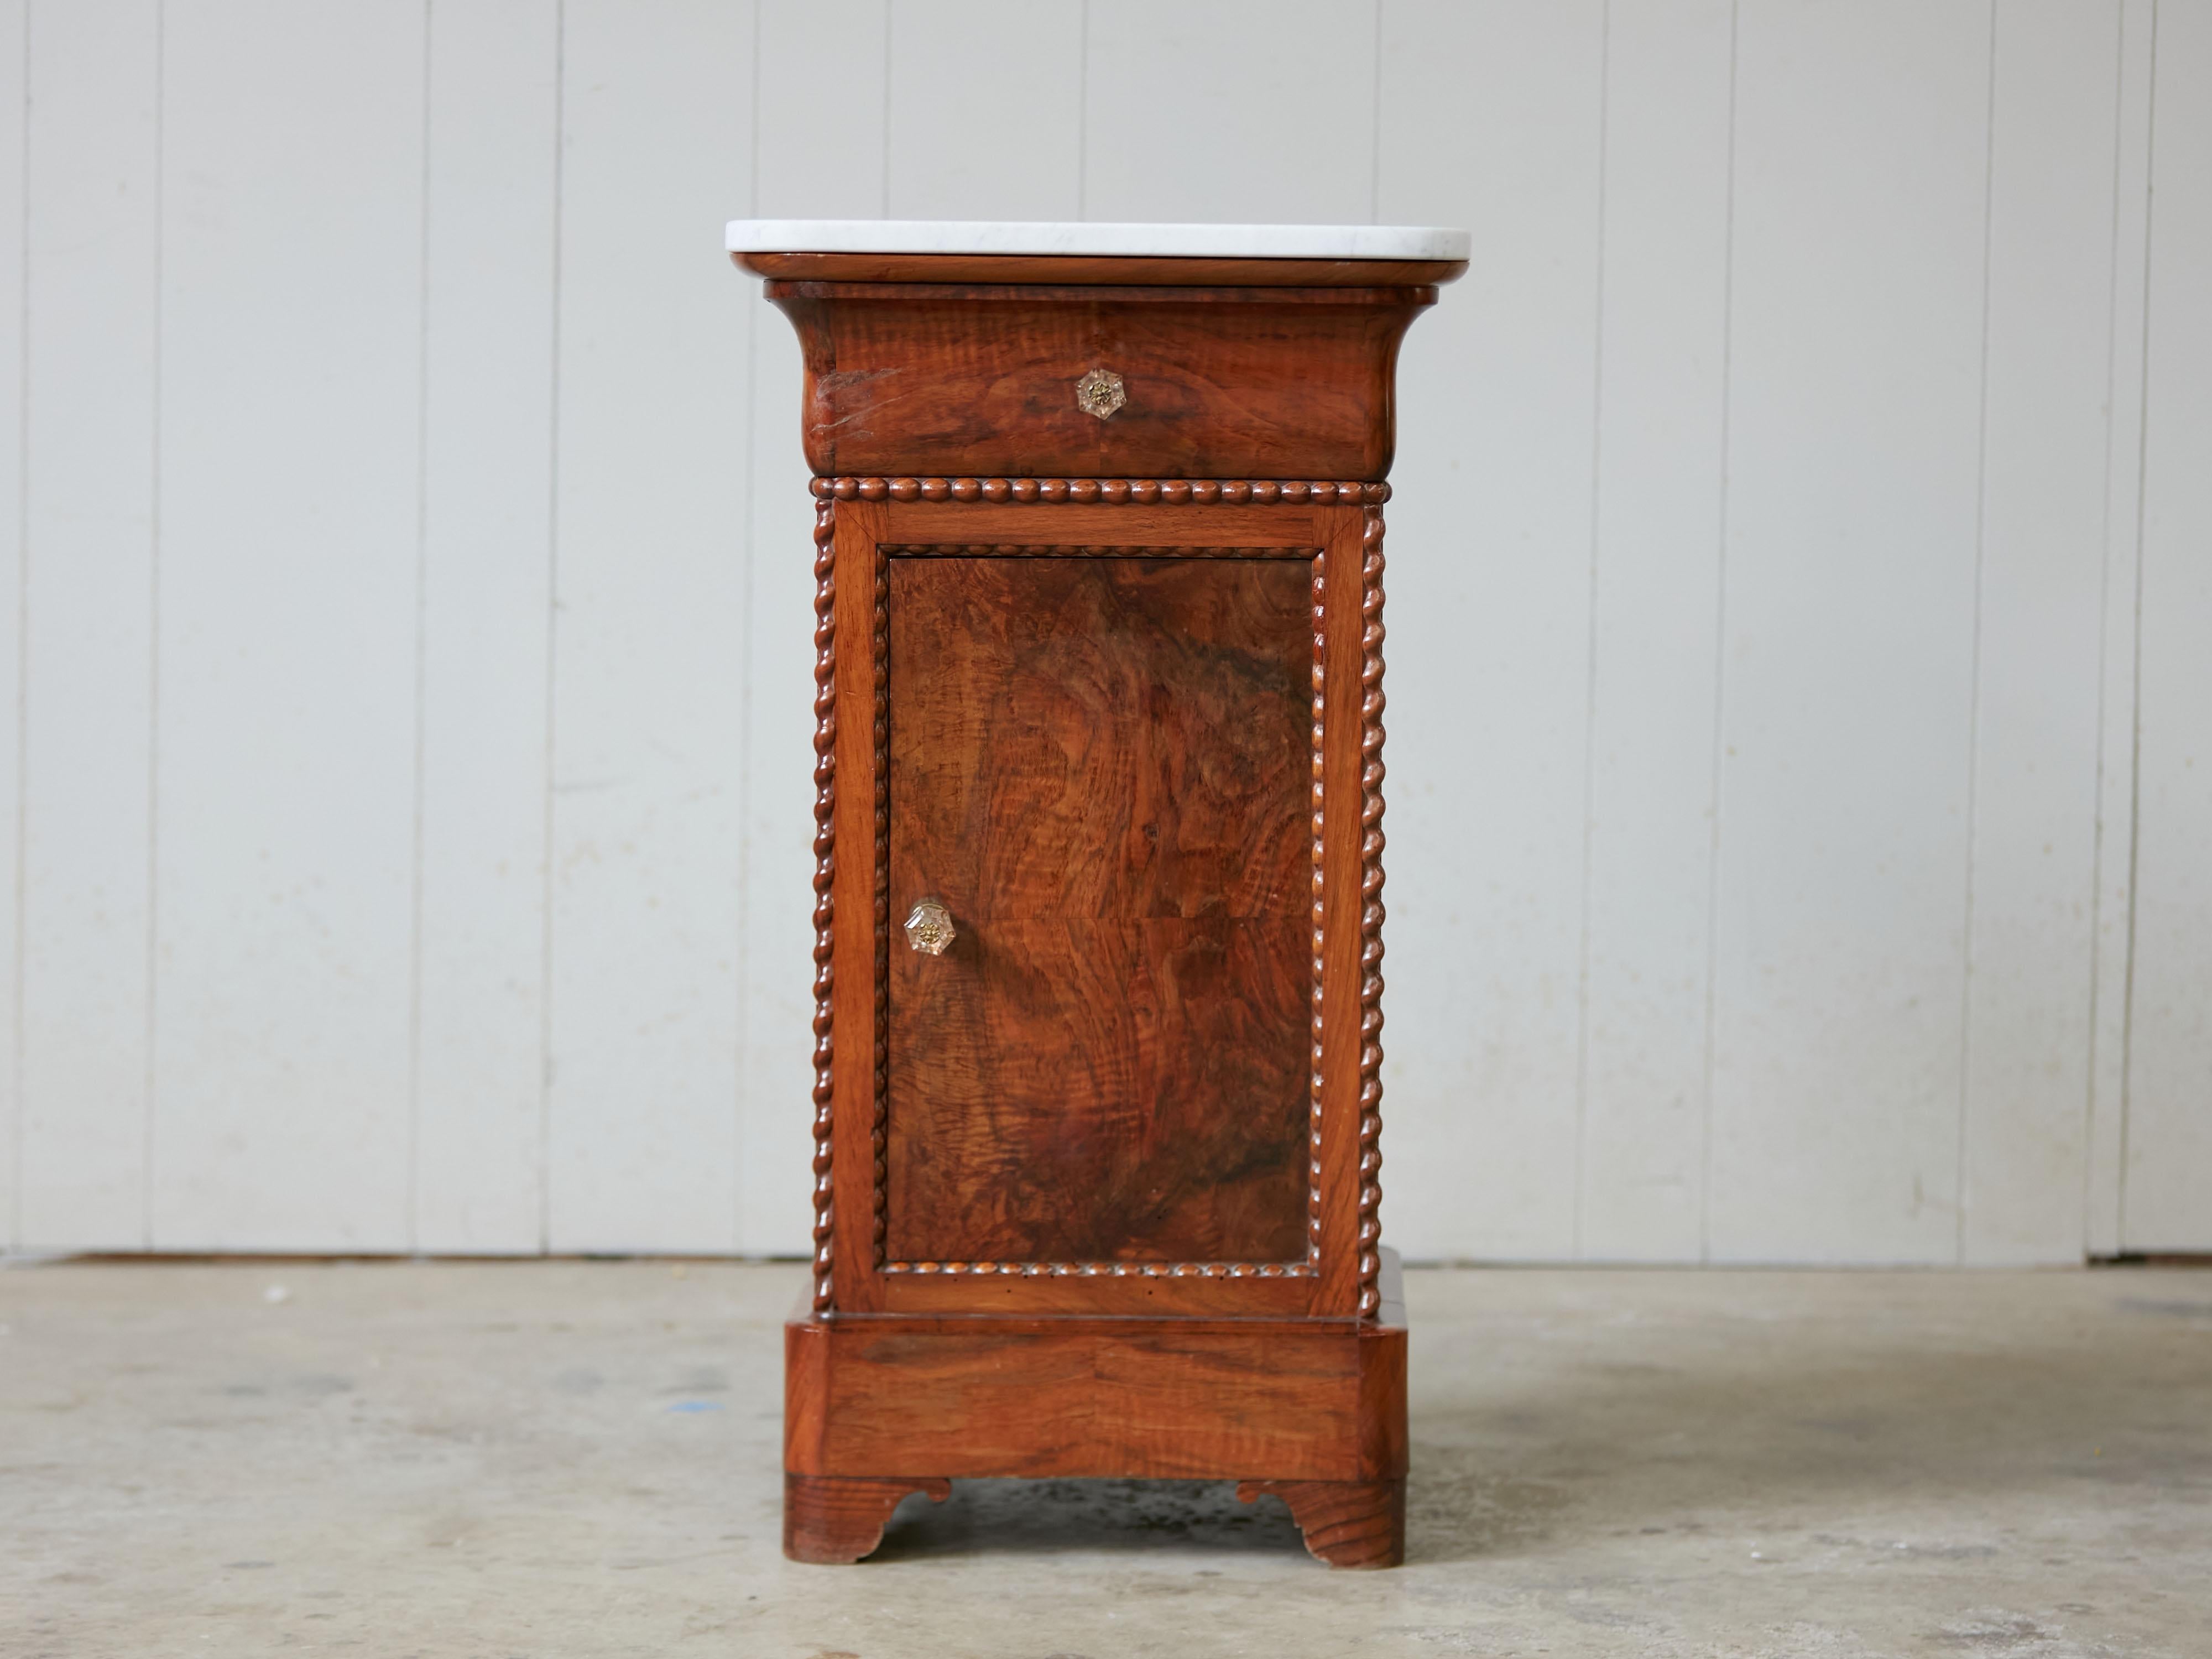 A French walnut small cabinet from the early 20th century, with white marble top and twisted motifs. Created in France at the Turn of the Century, this walnut cabinet features a square white marble top sitting above a single drawer over a single